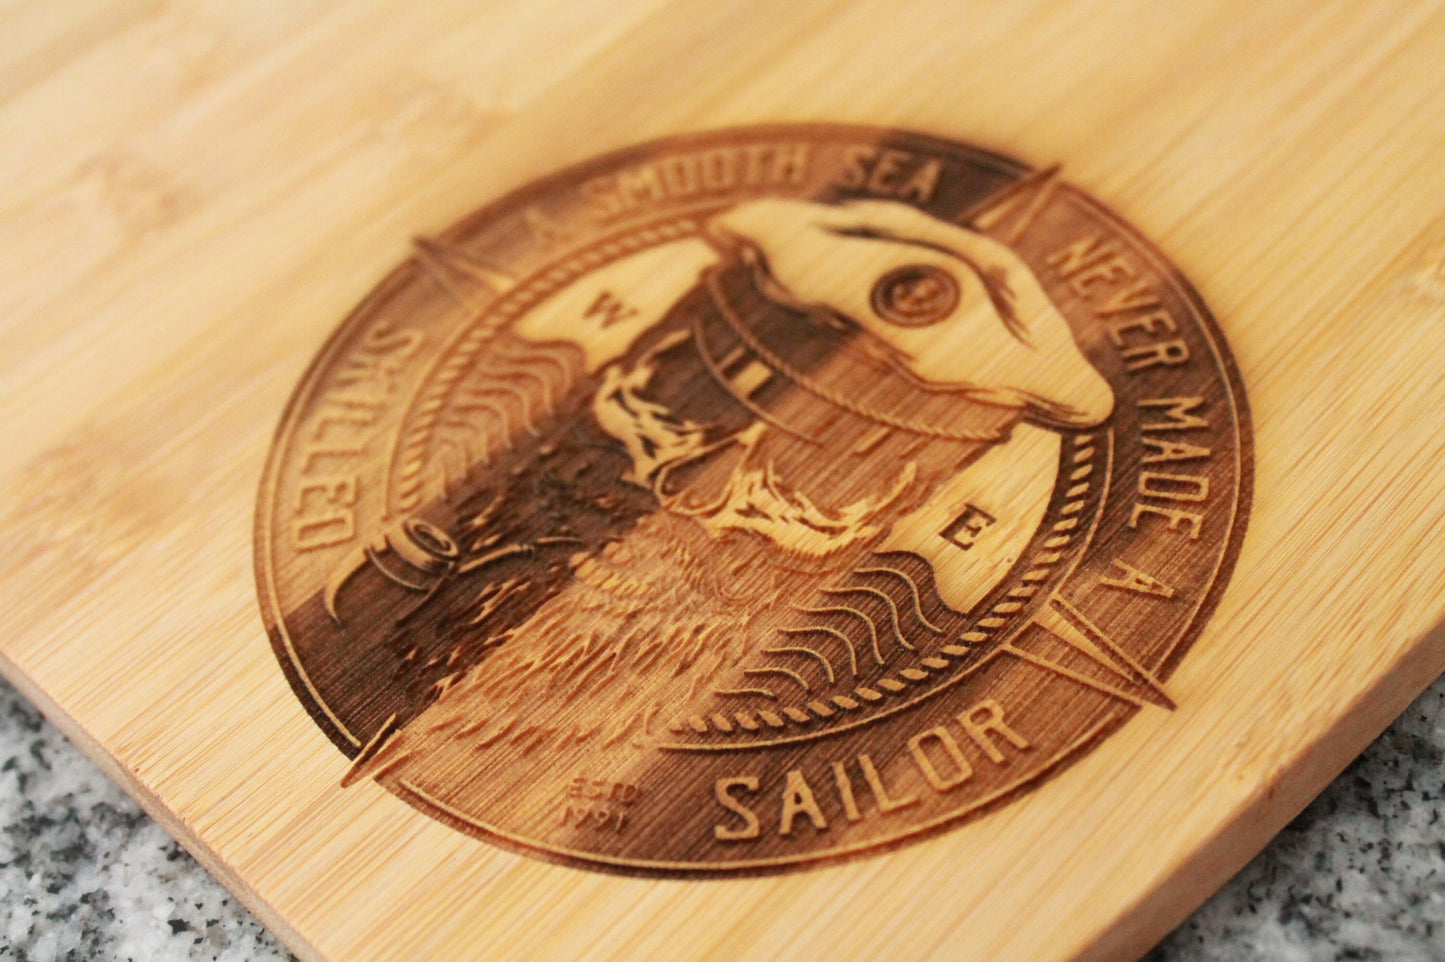 Wooden Engraved Cutting Board Sailor Nautical Beach House Yacht Boating Navy Decor Culinary Gift Cooking Hardwood Natural Compass Skull